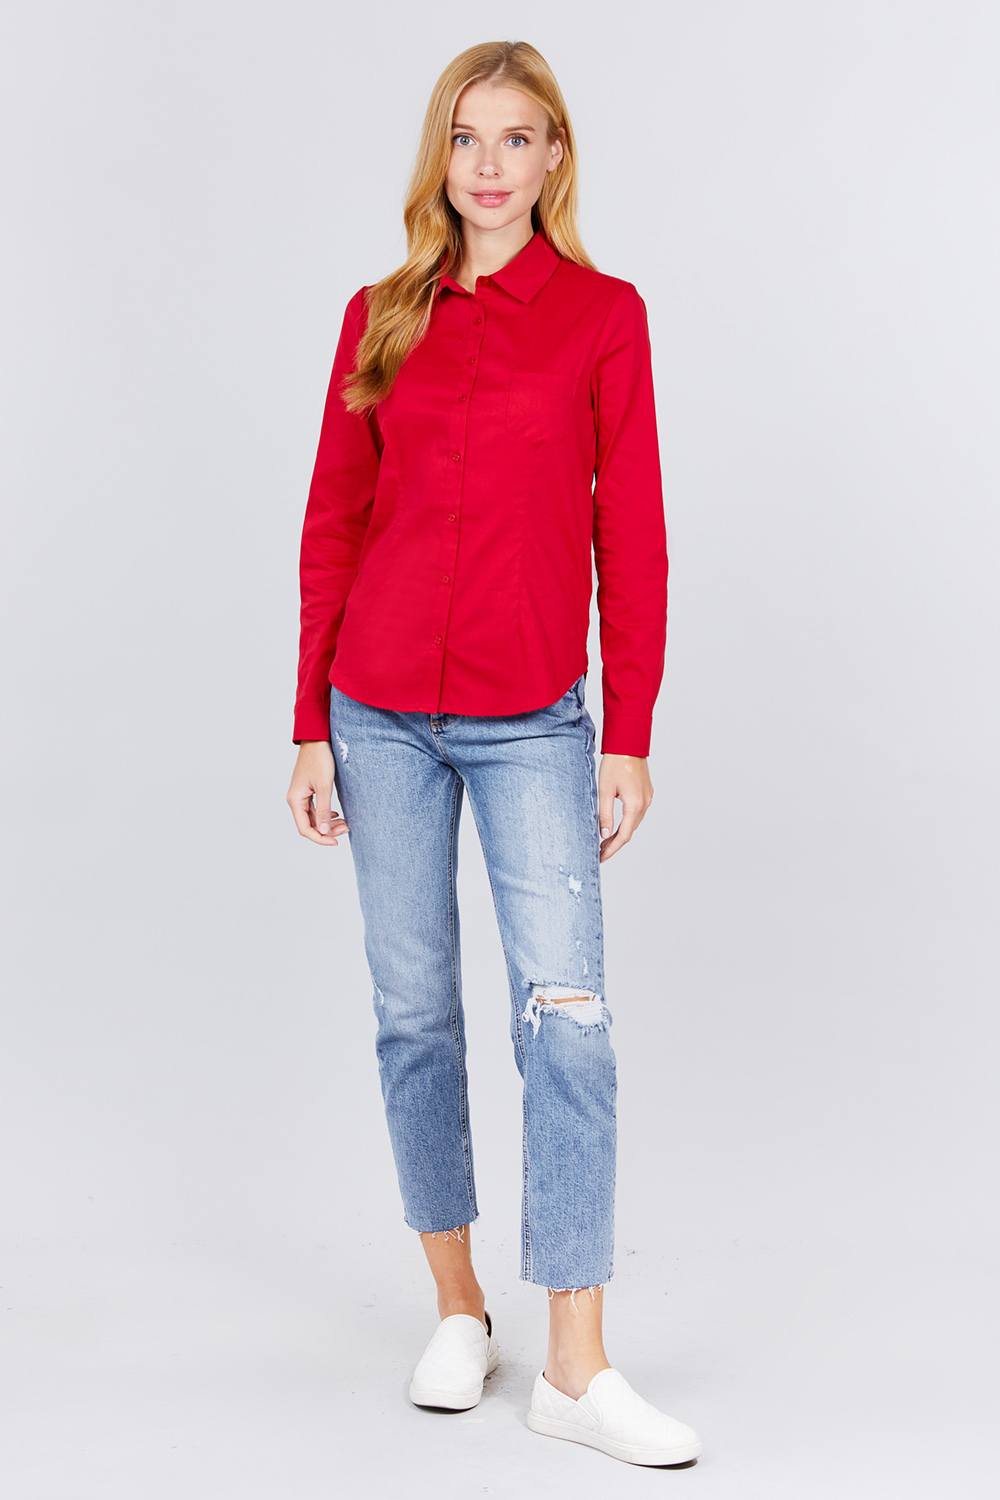 Long Sleeves Women Button Down Woven Shirts Business Formal Work Tops in Red